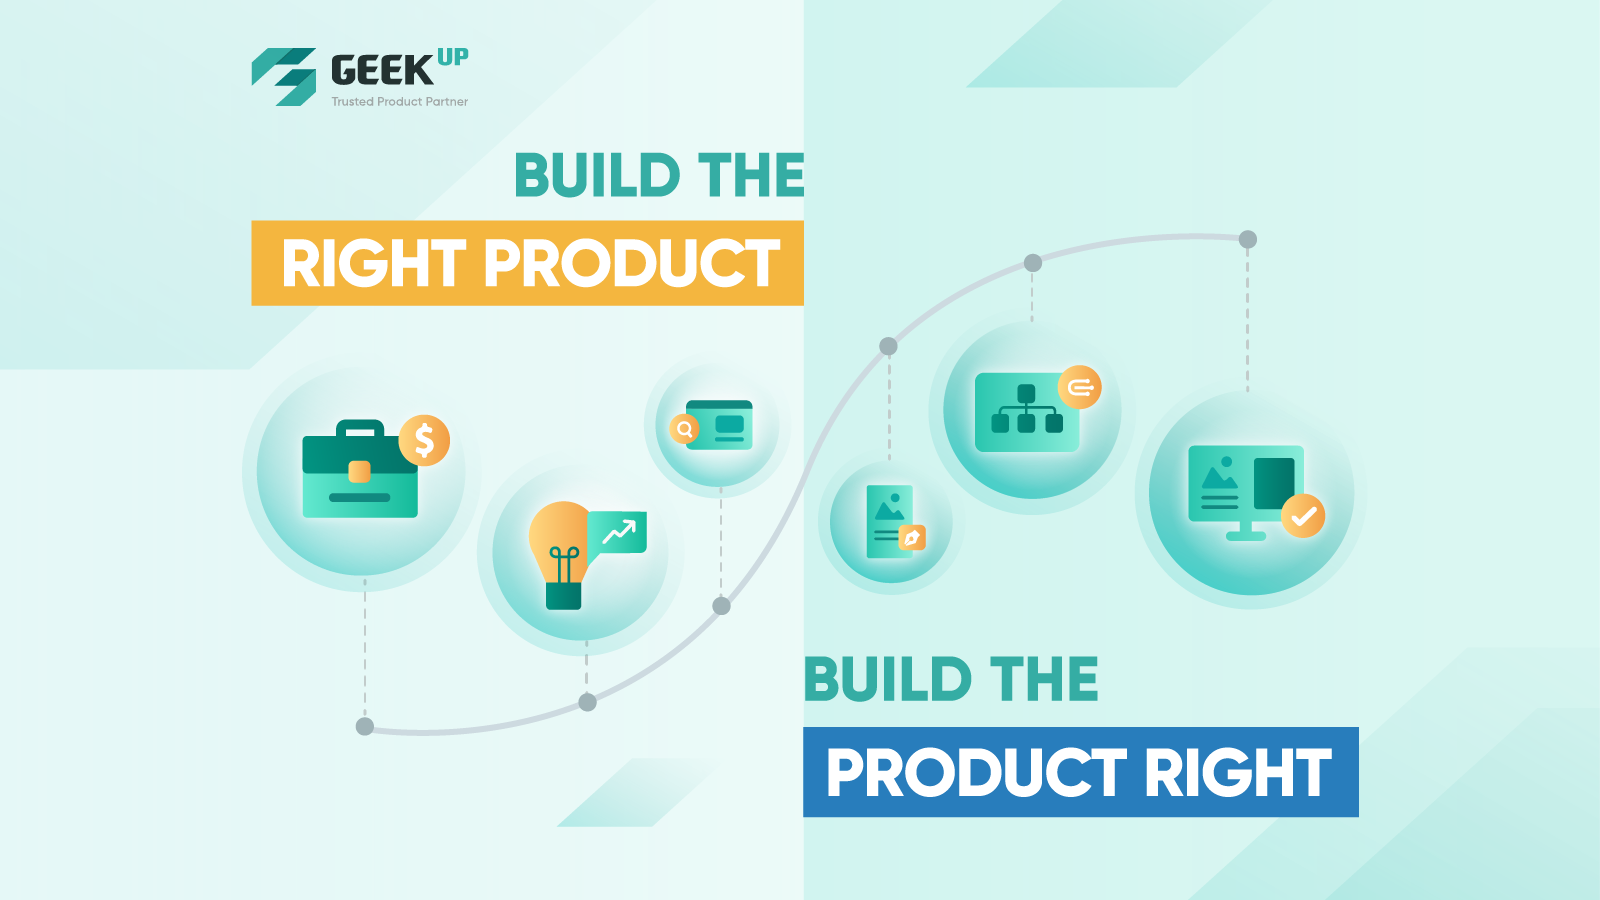 How to build the right product & build the product right